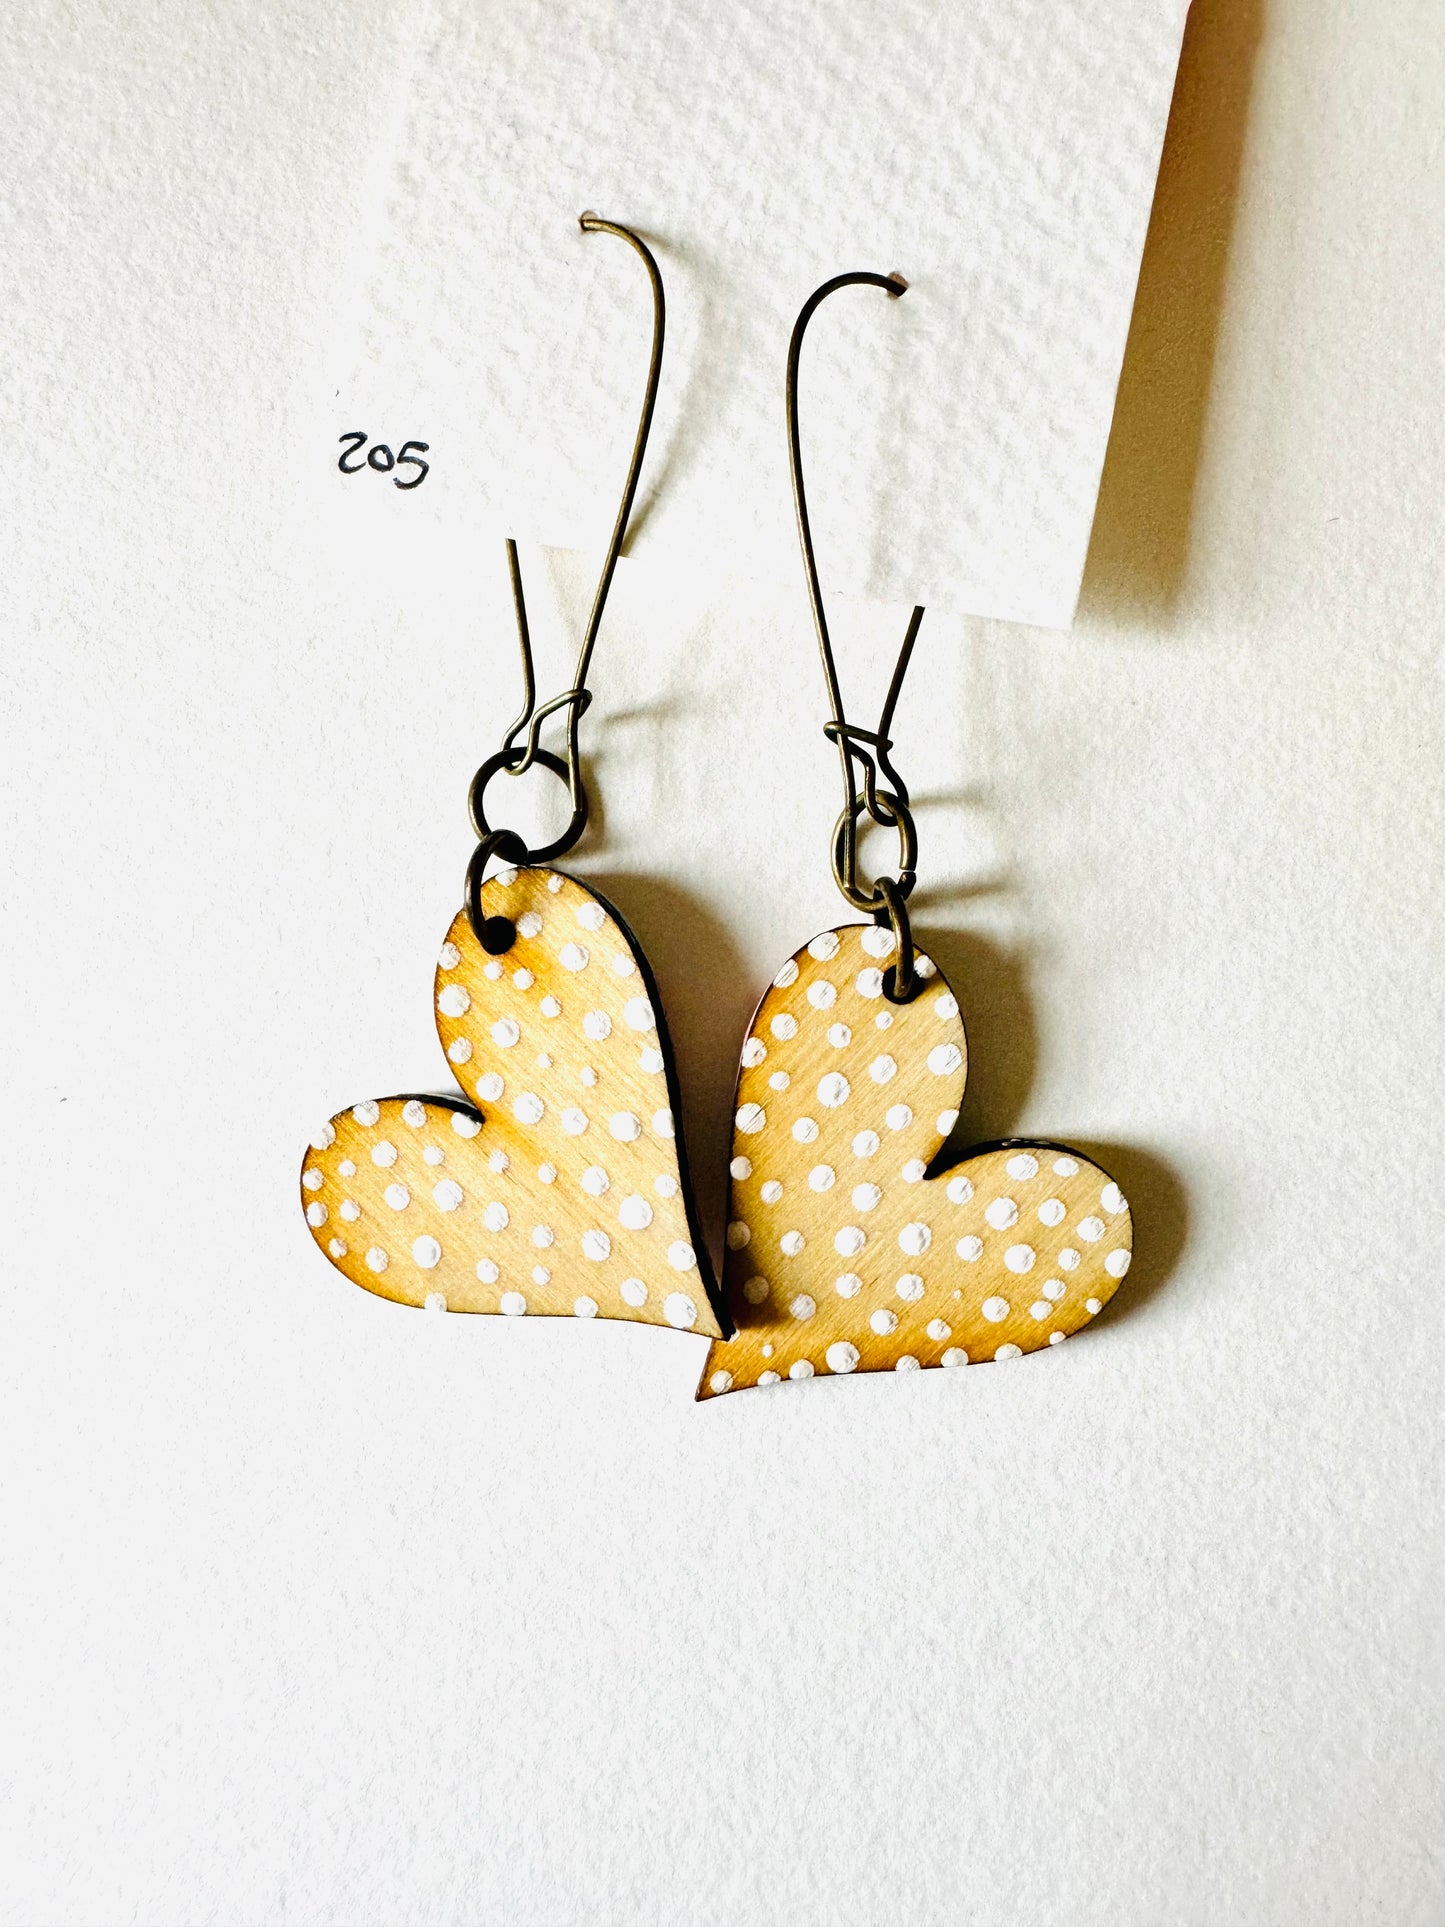 Colorful, Hand Painted, Heart Shaped Earrings 205